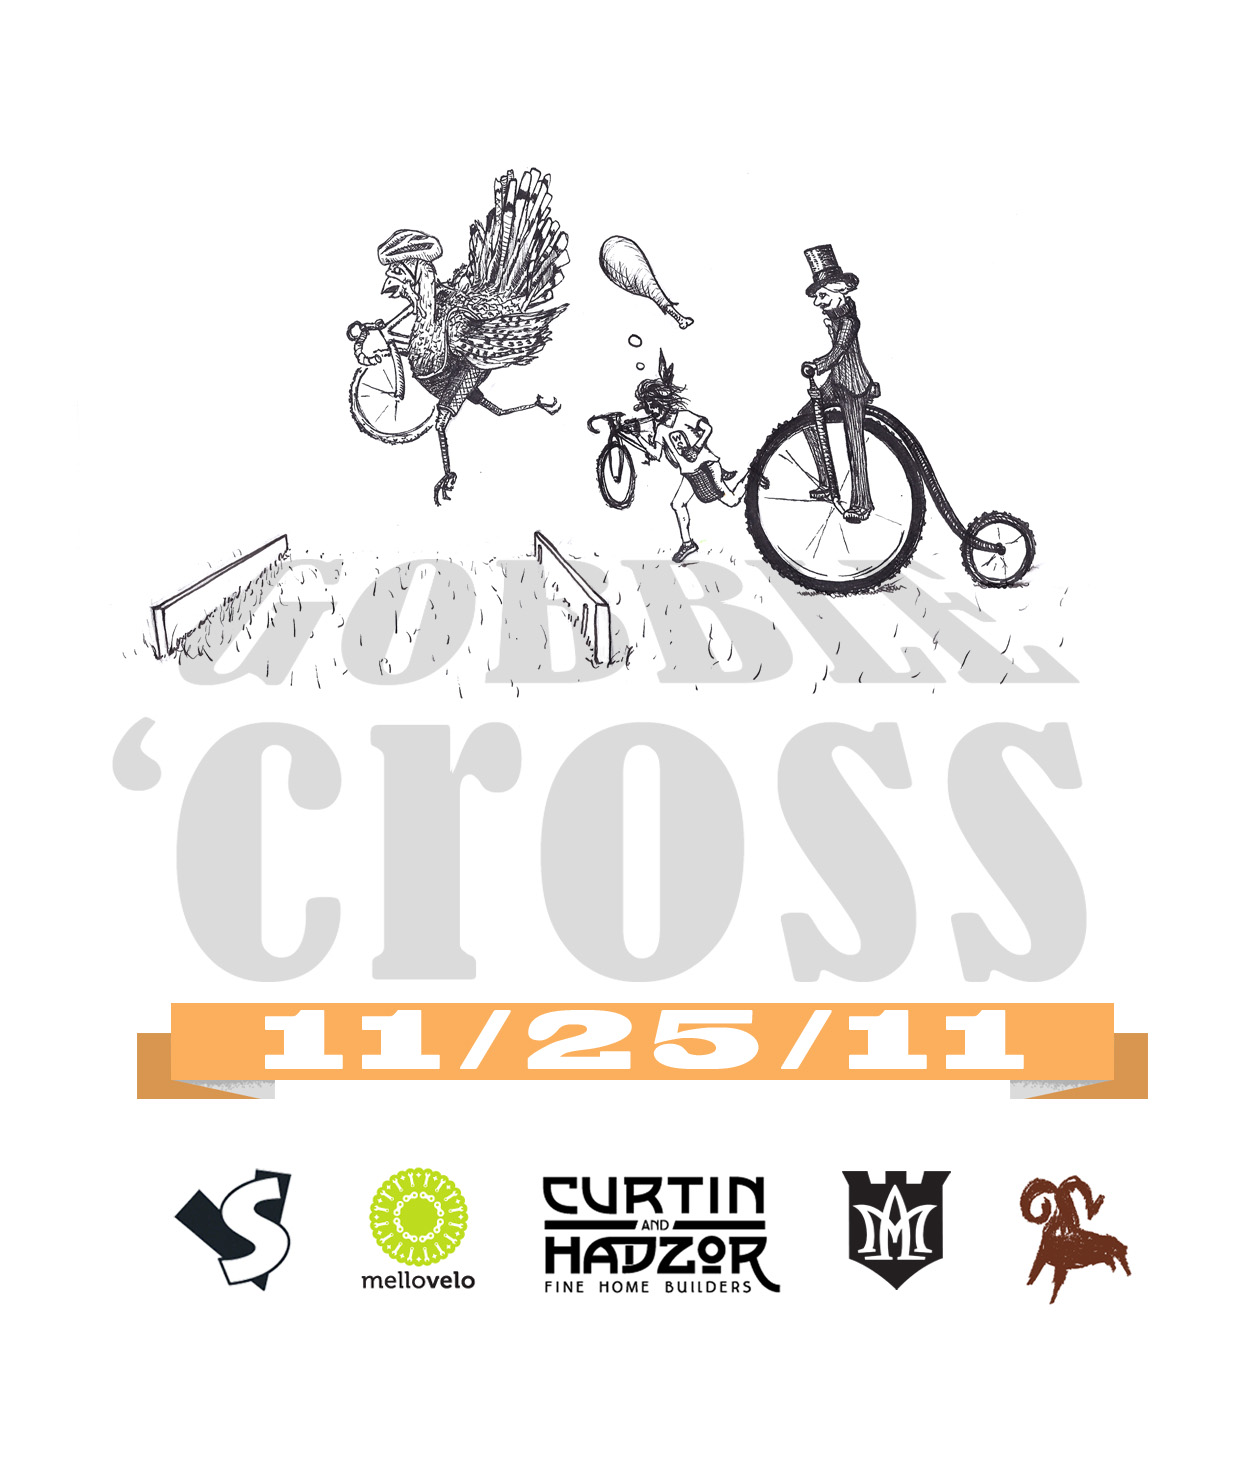 a citizens cyclocross race hosted by Curtin and Hadzor Fine Home Builders